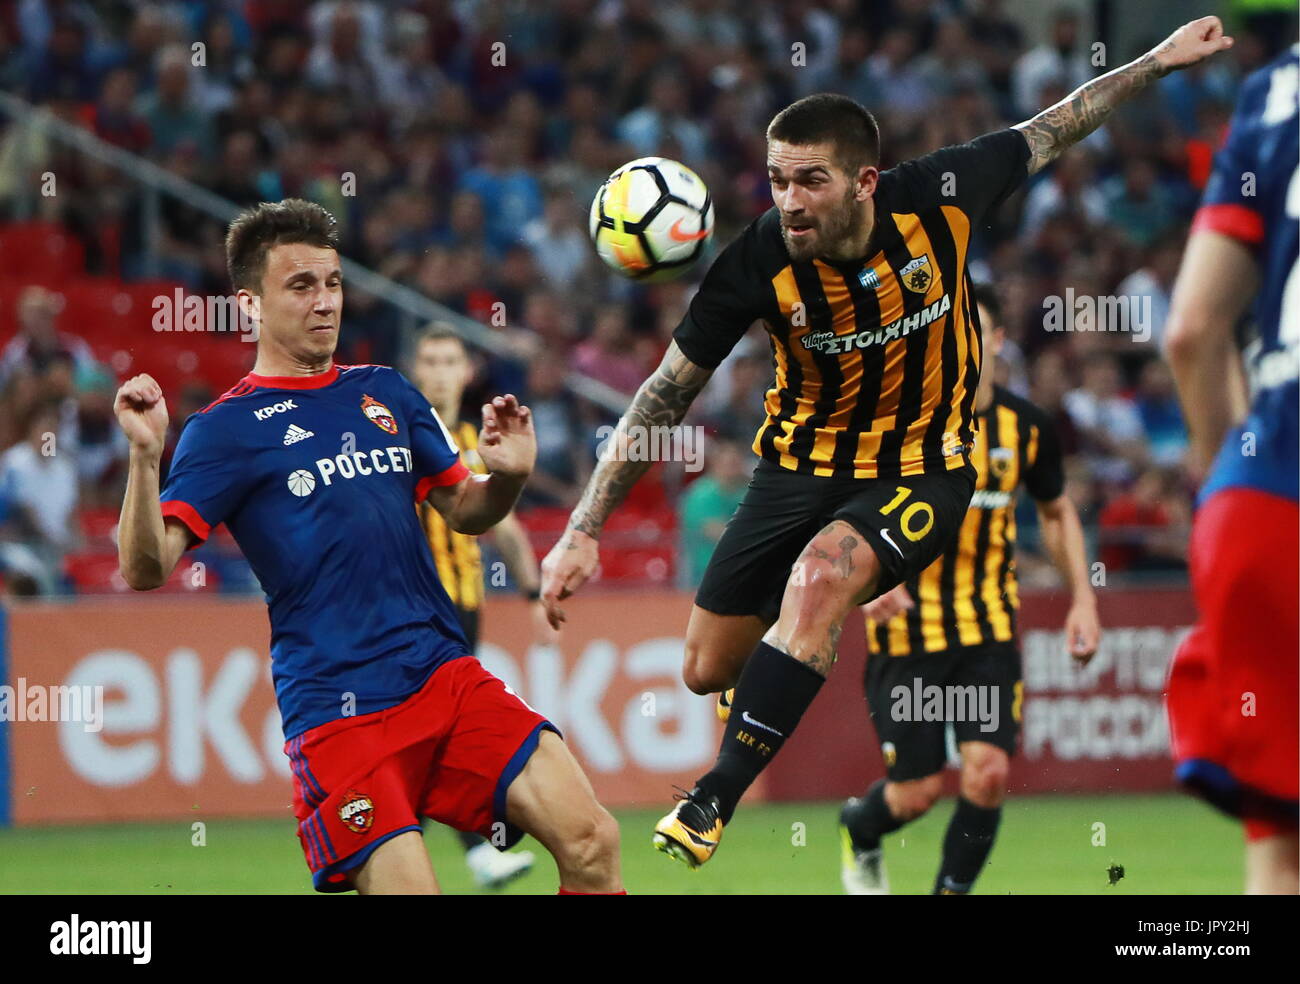 Moscow, Russia. 2nd Aug, 2017. CSKA Moscow's Alexander Golovin (L) and AEK  Athens' Marko Livaja fight for the ball in the second leg of their 2017/18  UEFA Champions League third qualifying round